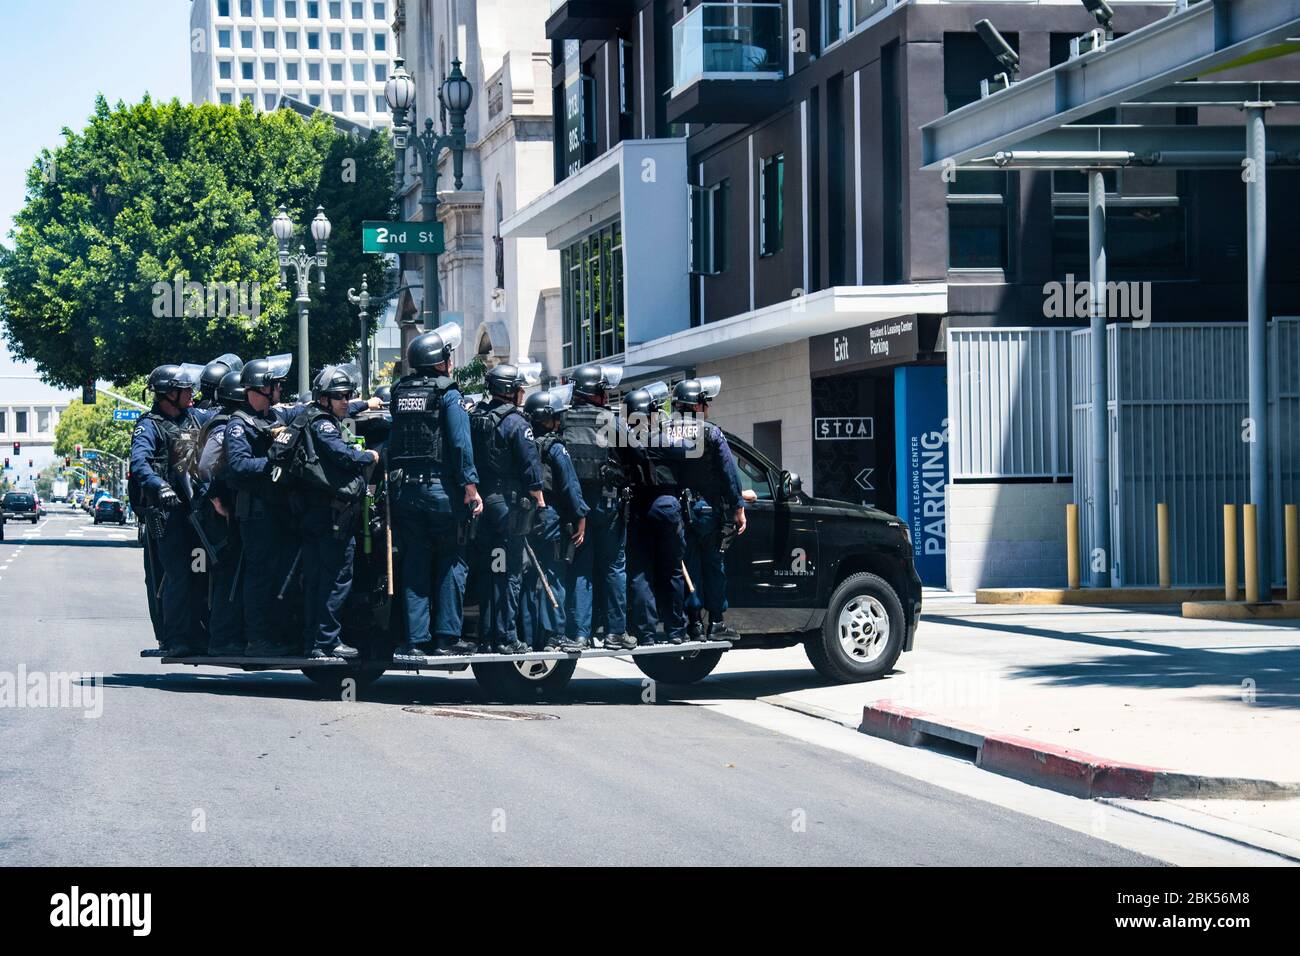 Police swat team preparing for civil unrest ride in police vehicle during a Black Lives Matter protest in Los Angeles during the Coronavirus outbreak Stock Photo